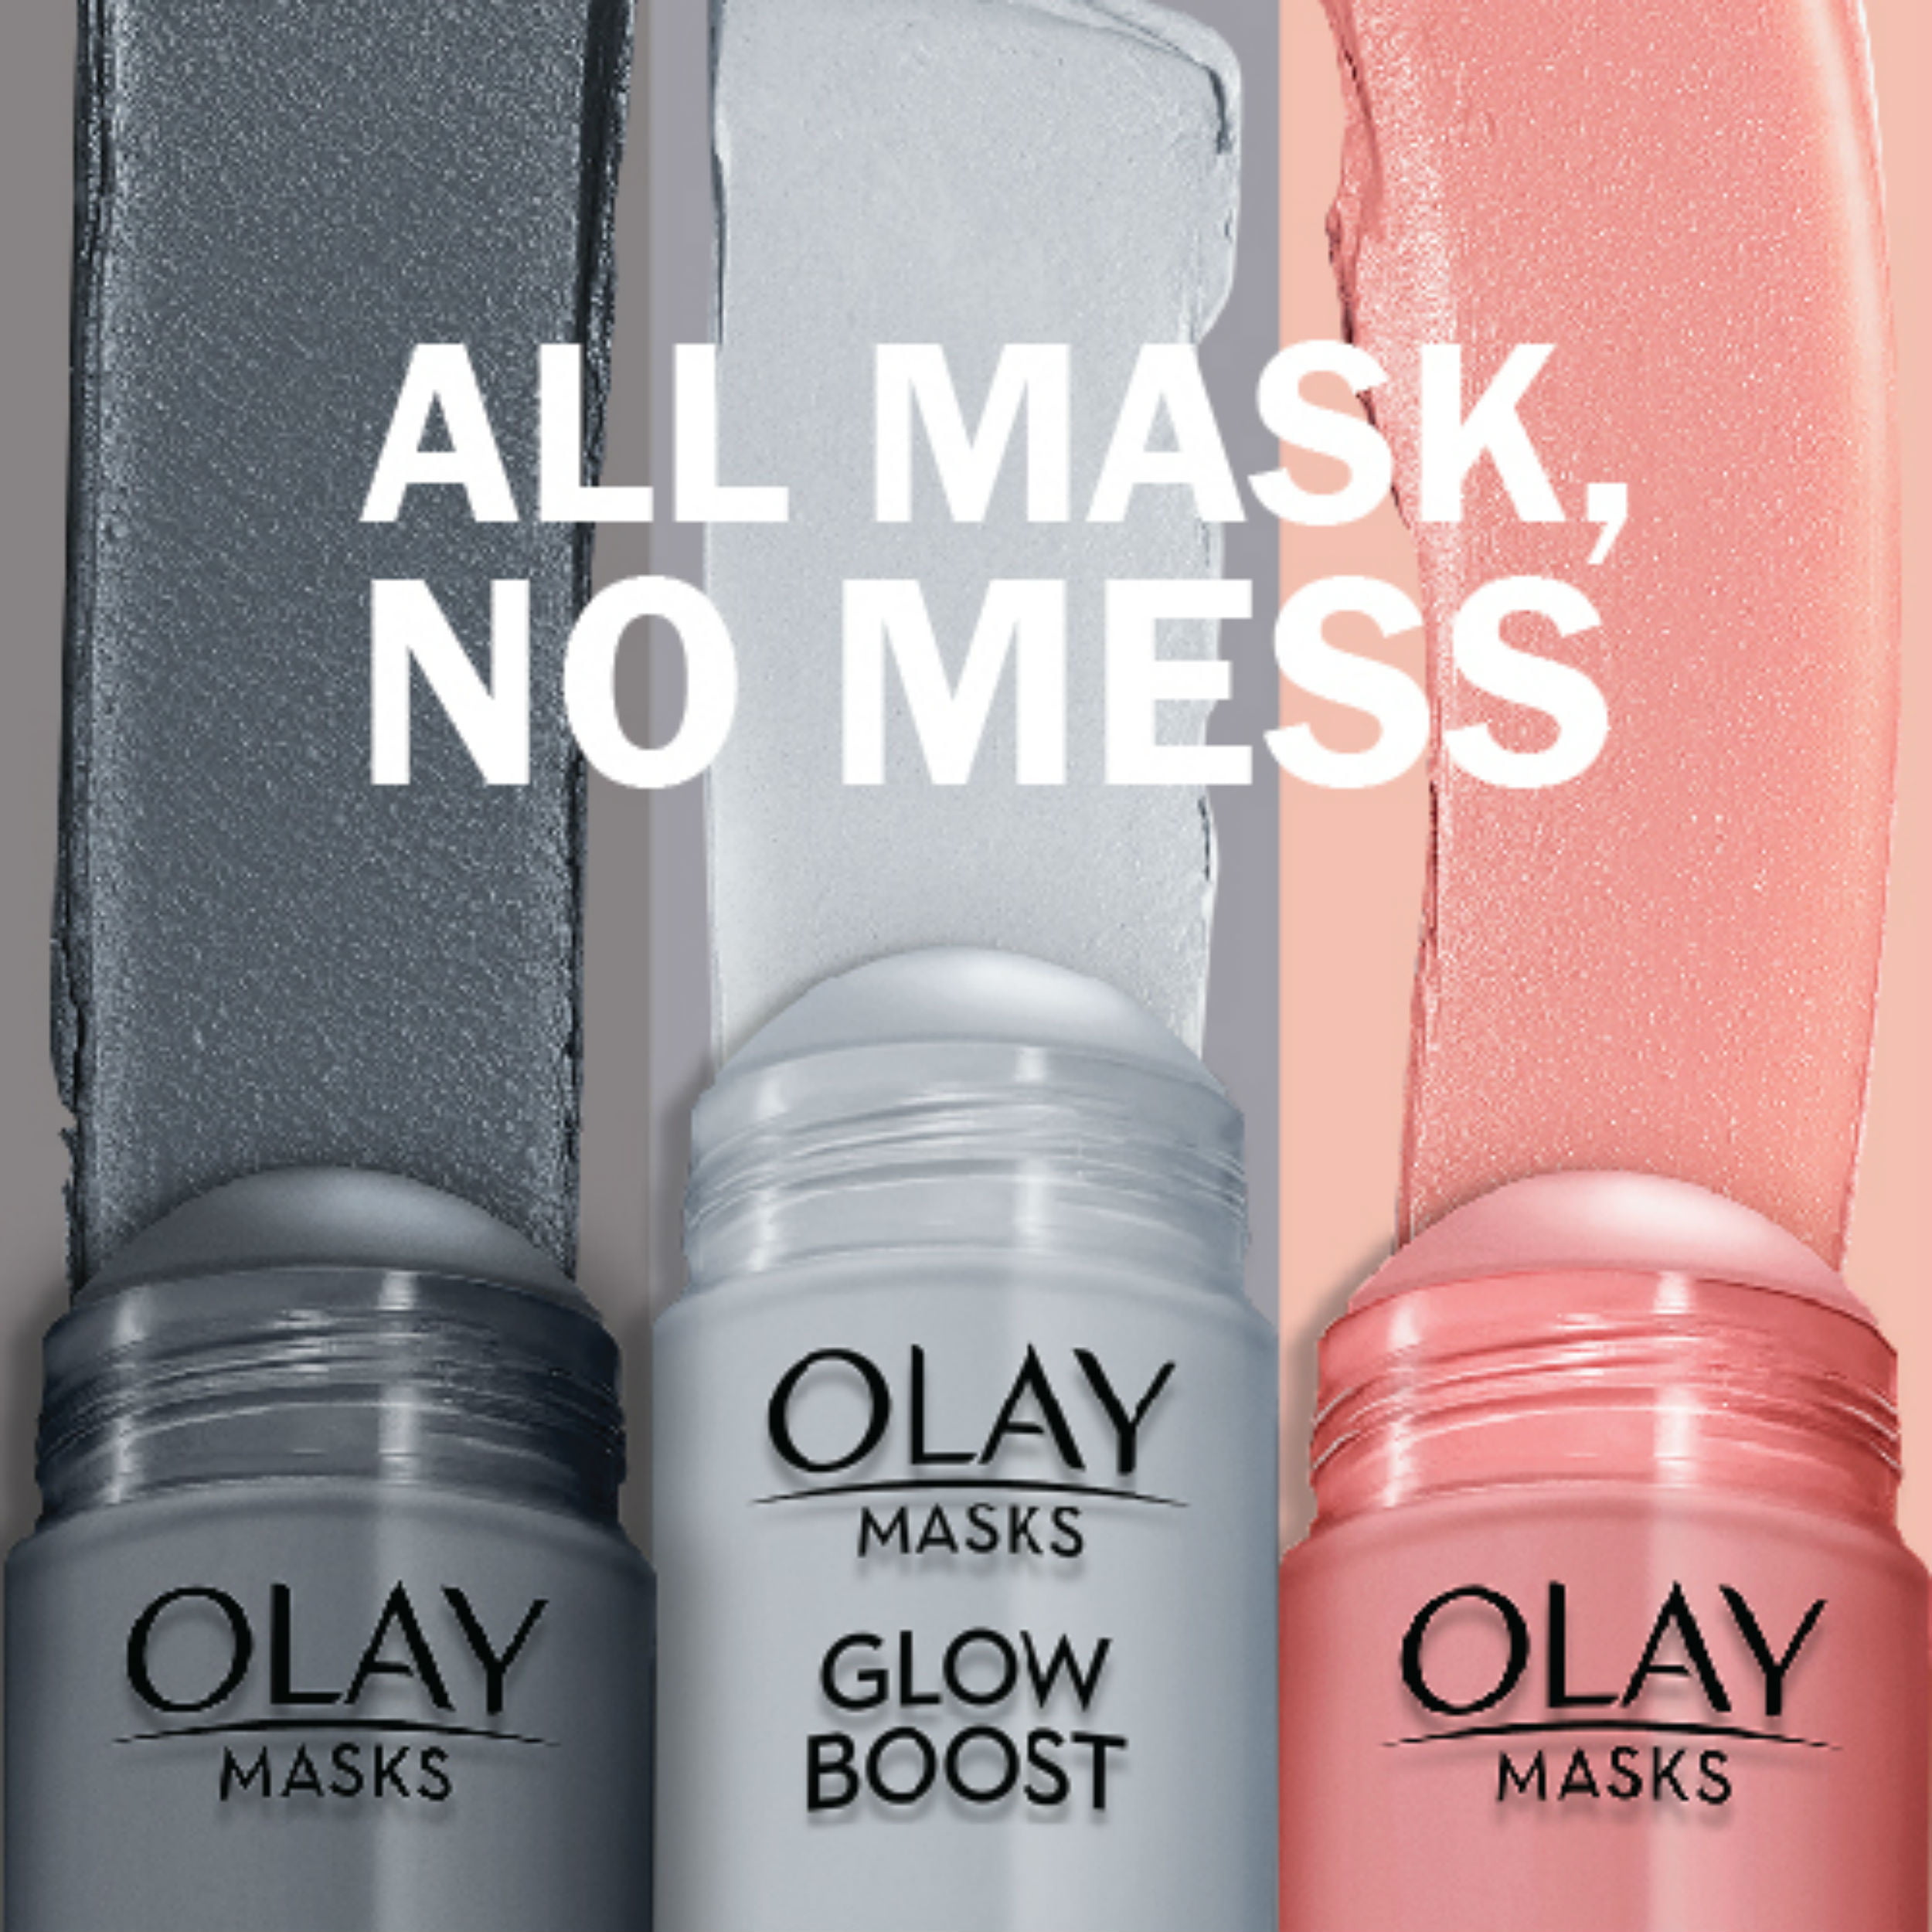 Olay Glow Boost Clay Stick Mask Duo